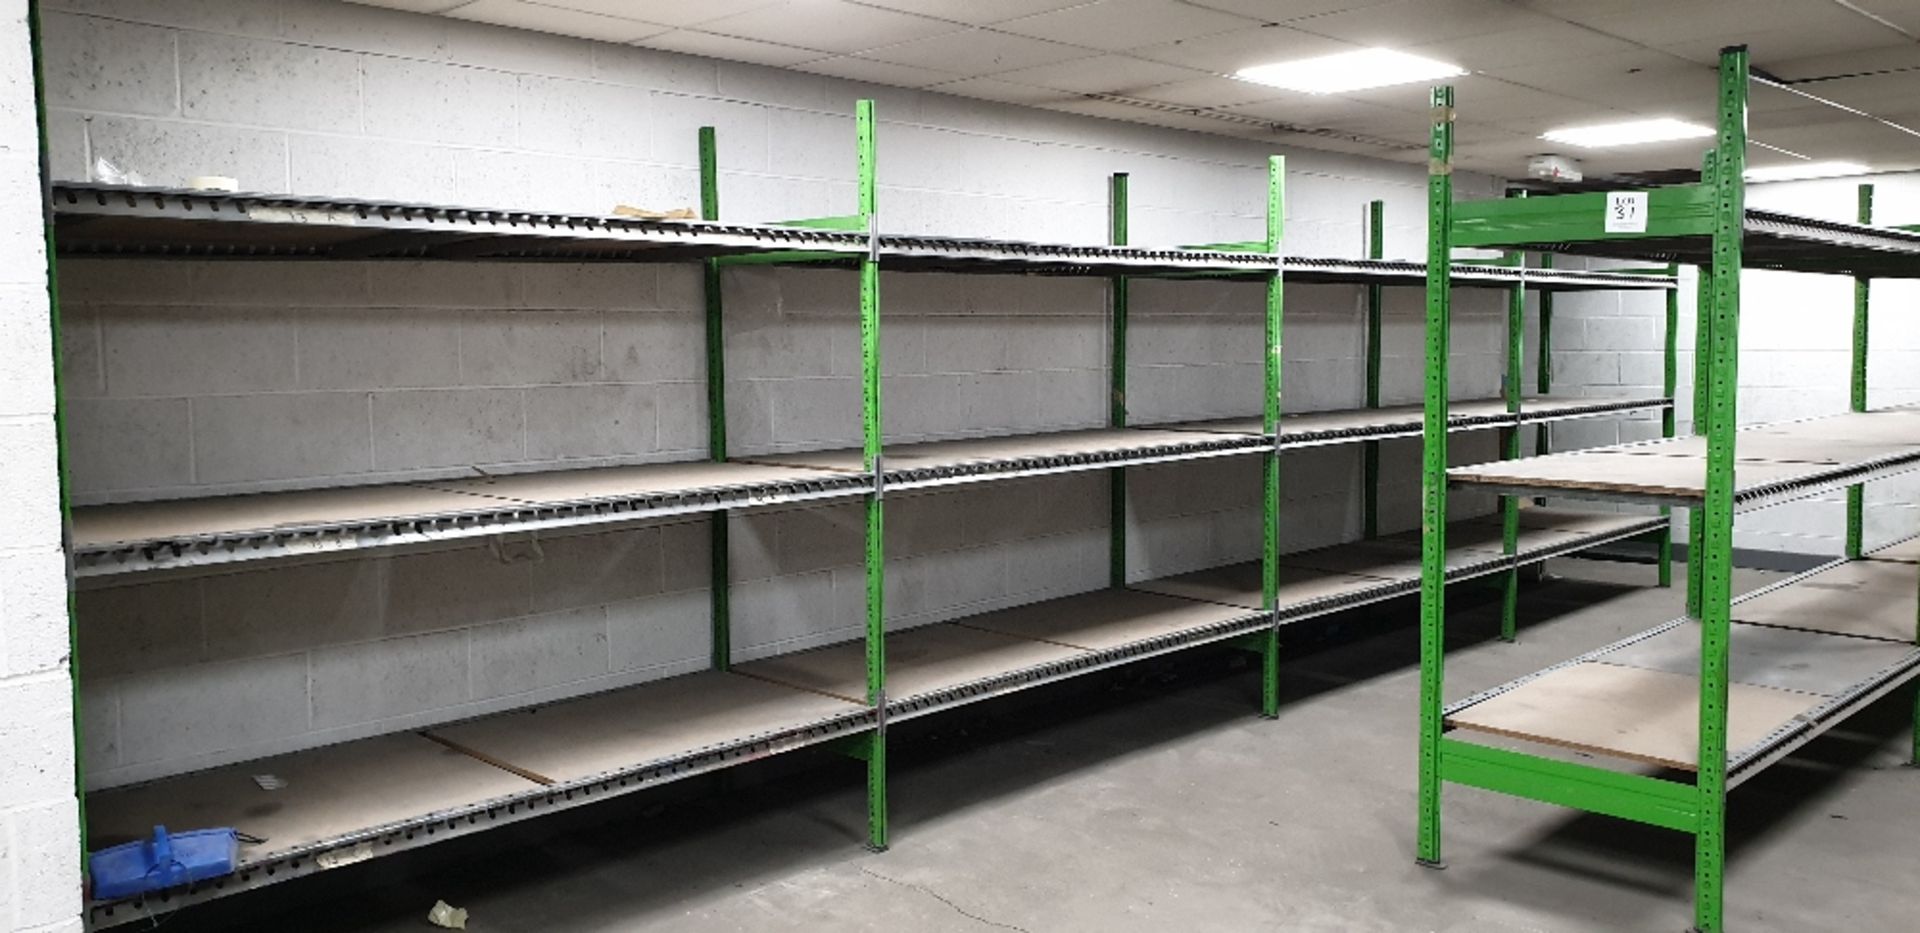 13 - bays of adjustable boltless shelving (bay size 2000m x 800m x 2200mm high)